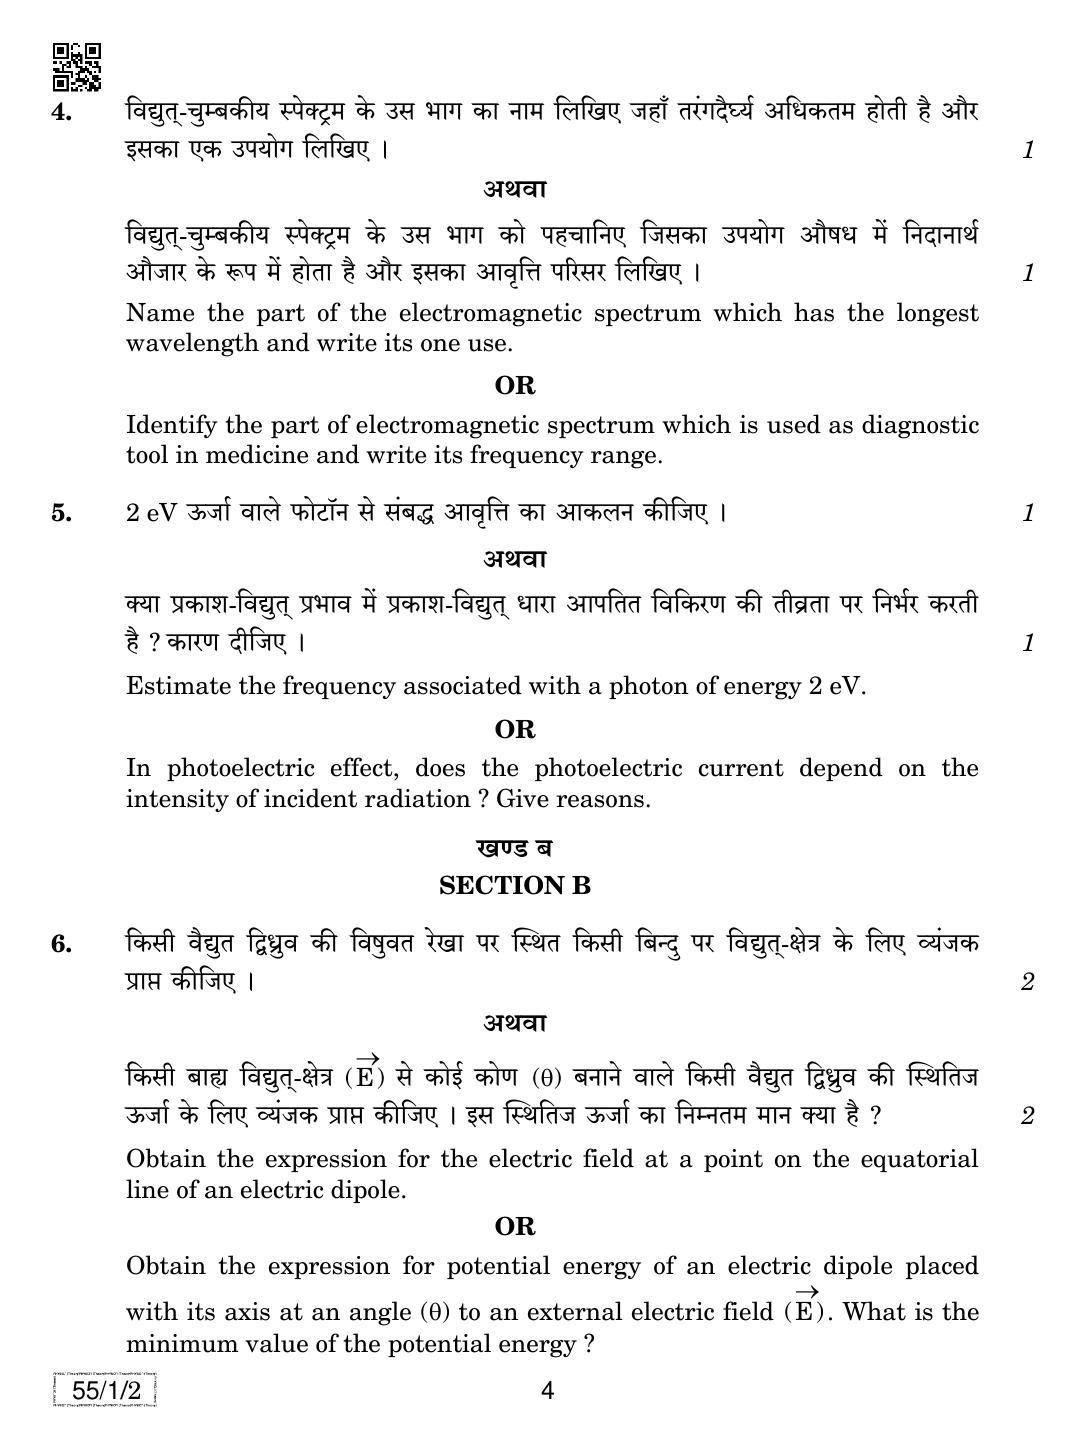 CBSE Class 12 55-1-2 PHYSICS 2019 Compartment Question Paper - Page 4